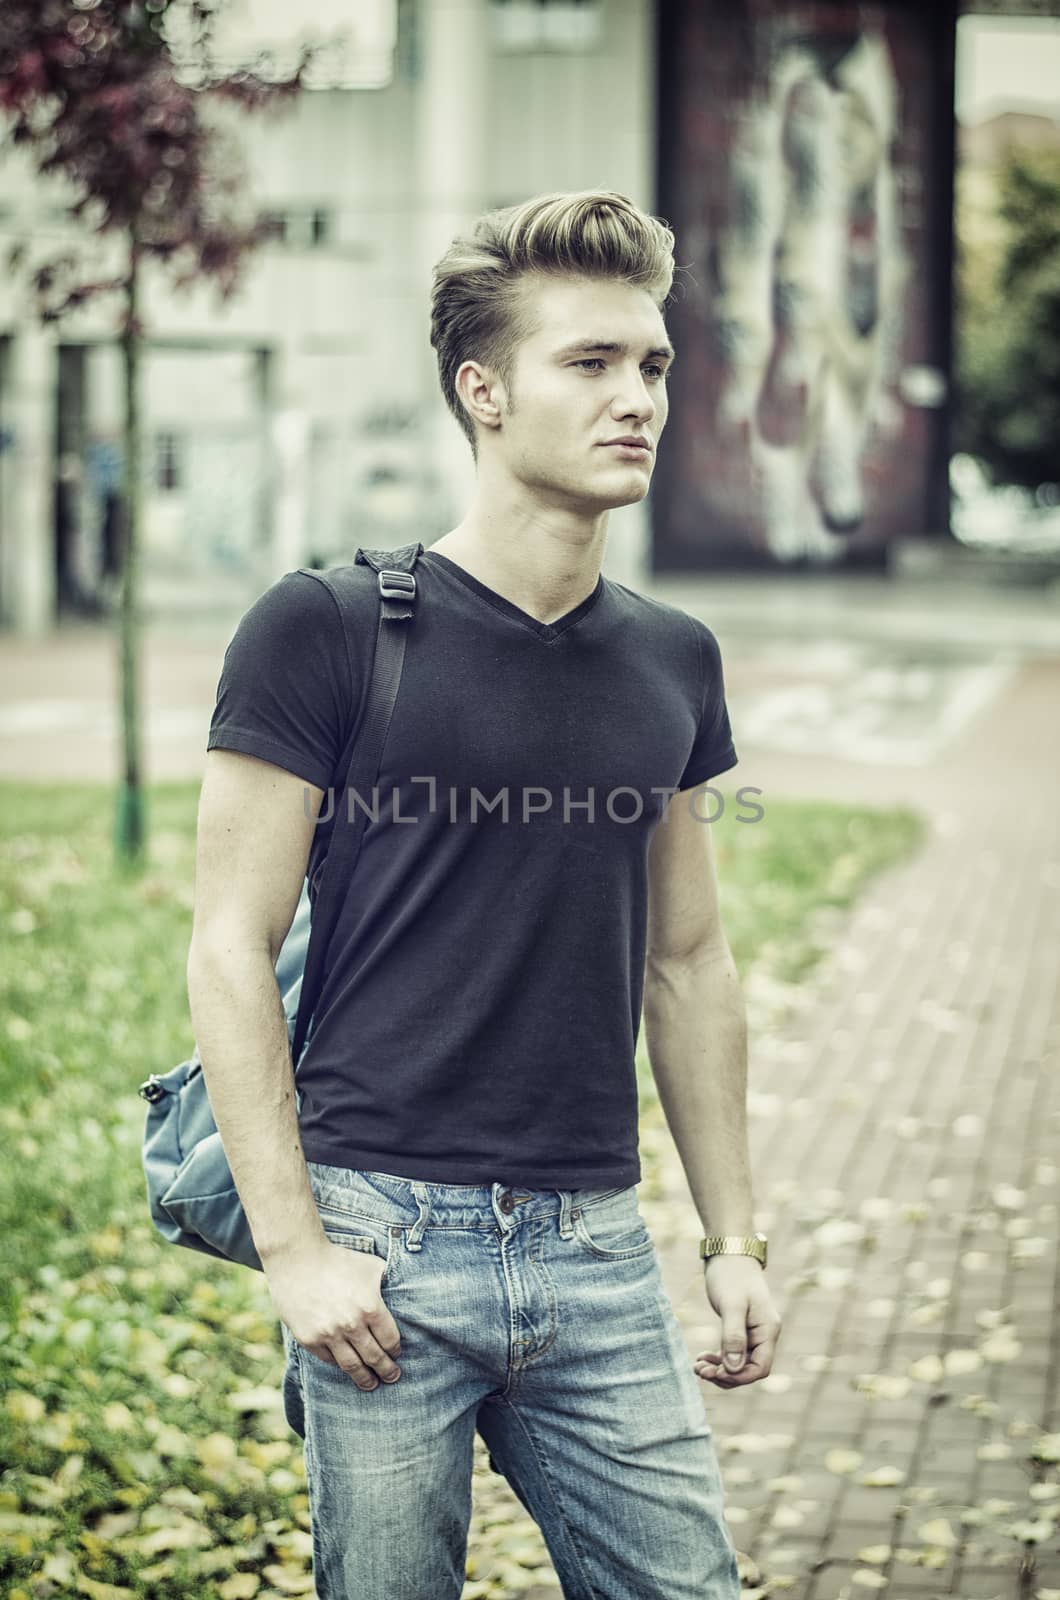 Young man standing in city environment, with backsack by artofphoto